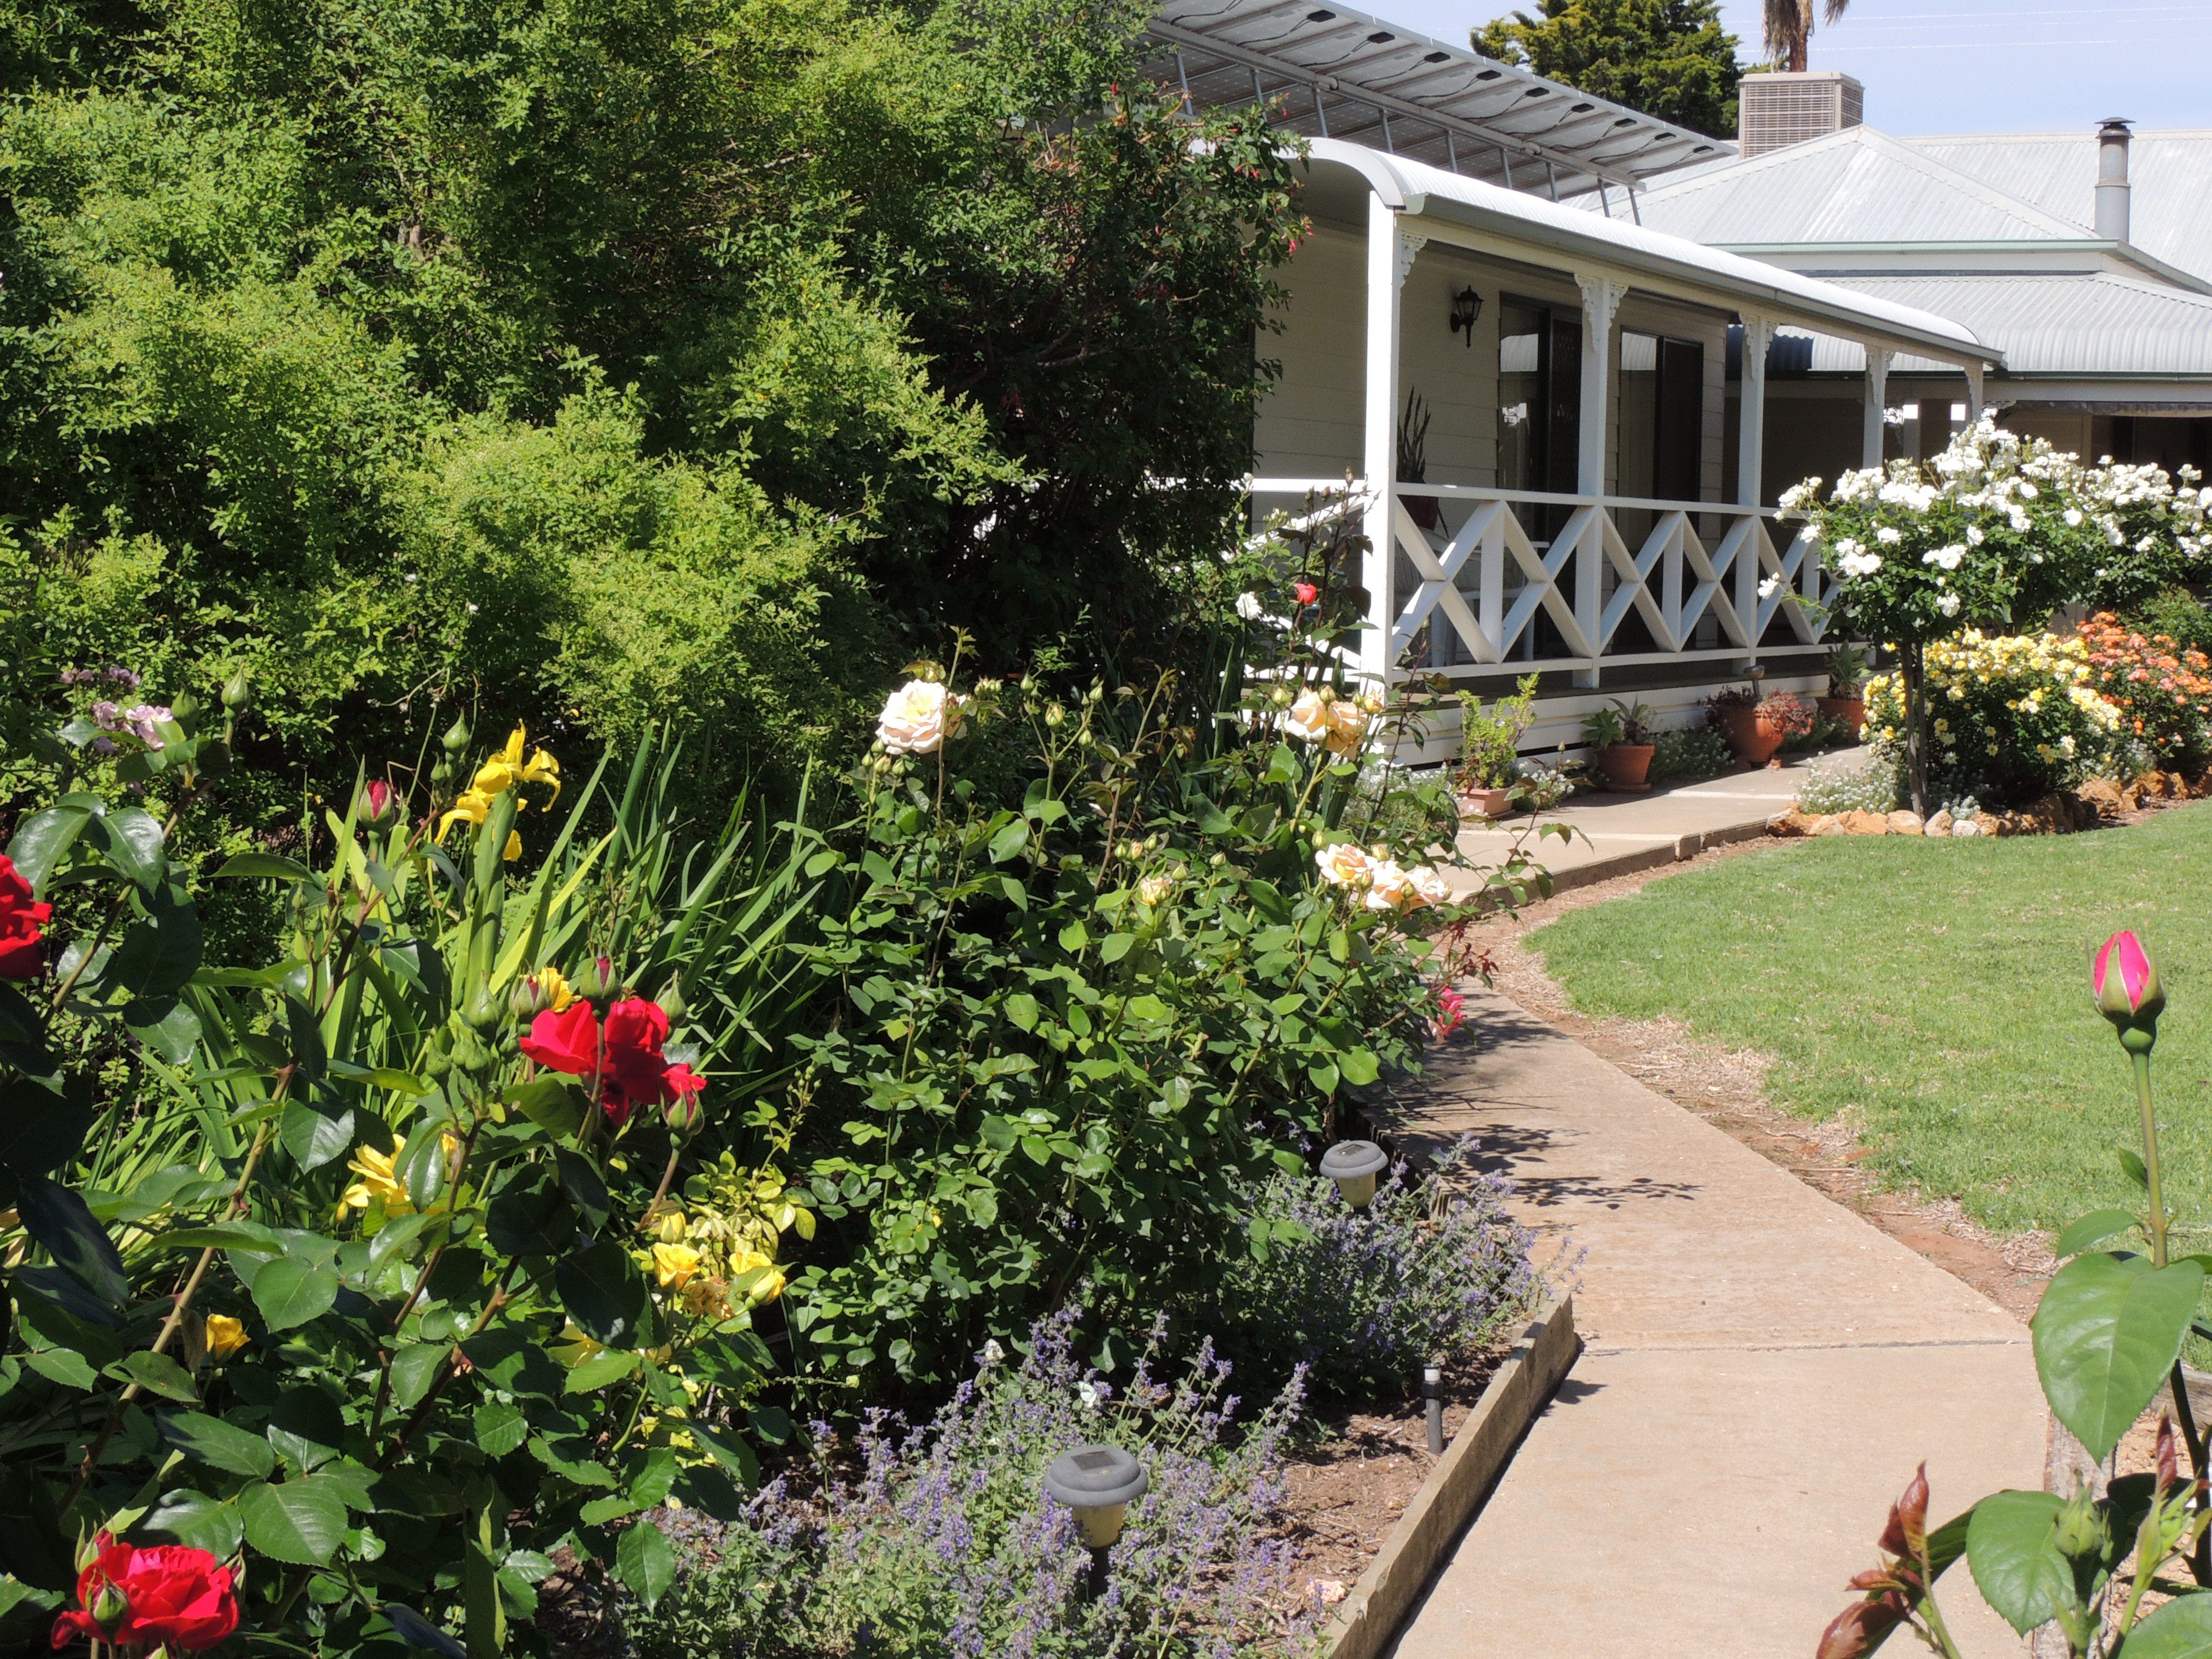 Burrabliss Bed and Breakfast - Geraldton Accommodation